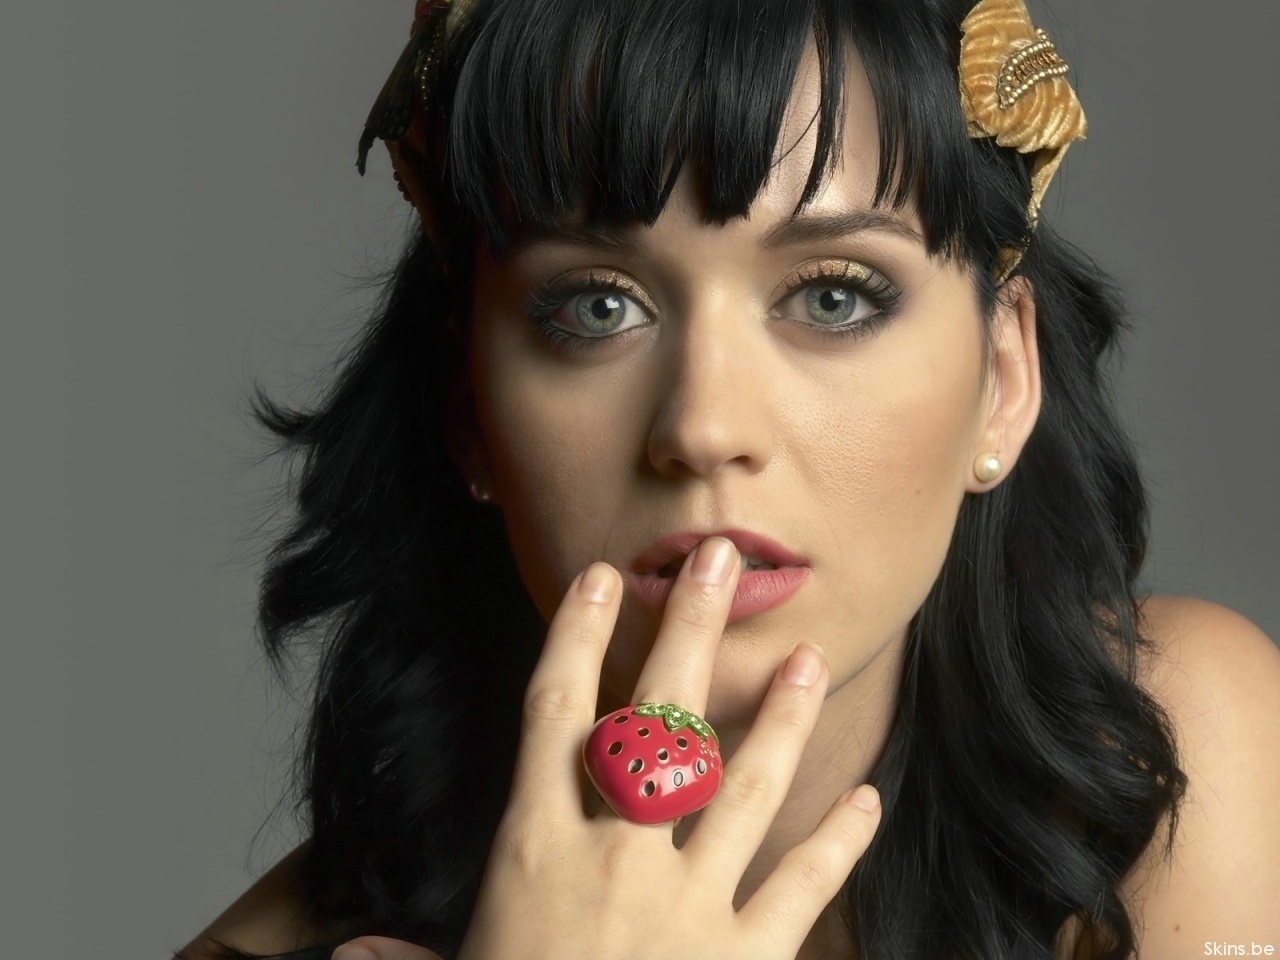 Katy Perry,singer,pictures